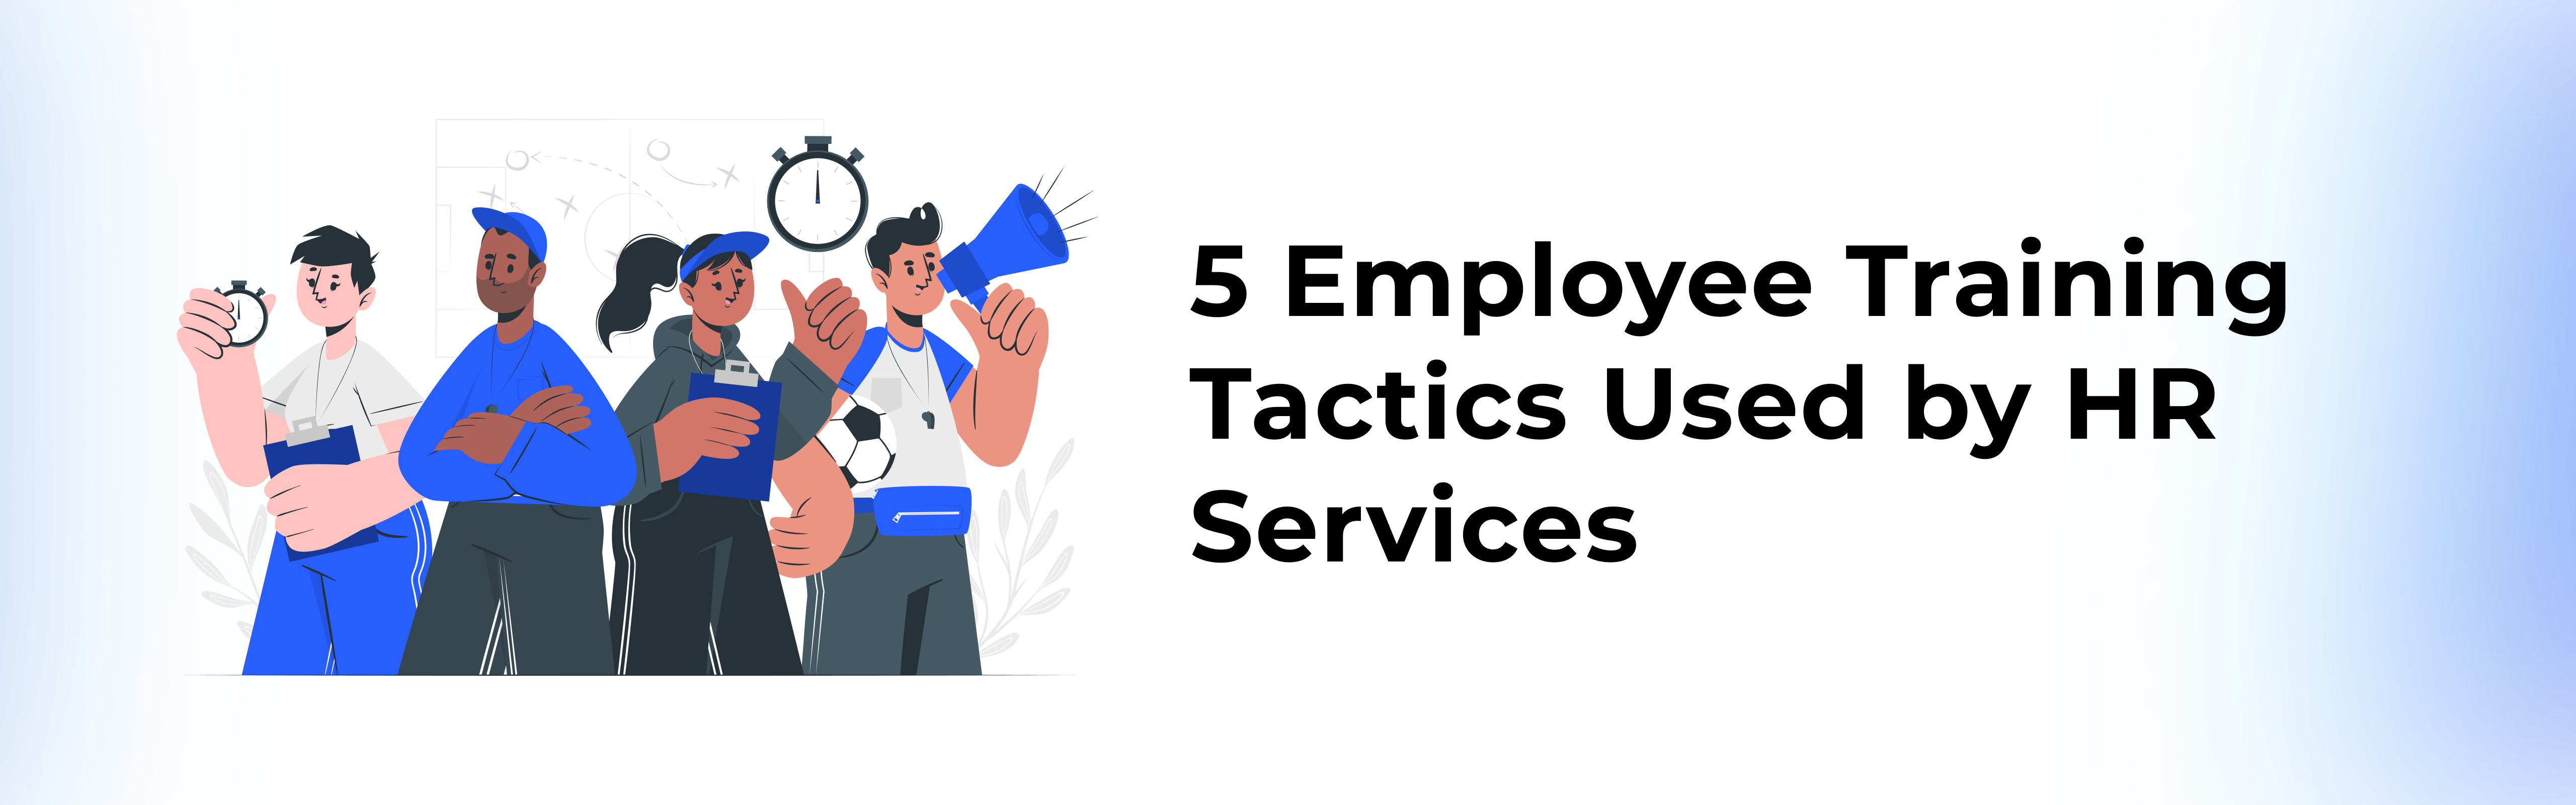 5-employee-training-tactics-used-by-hr-services